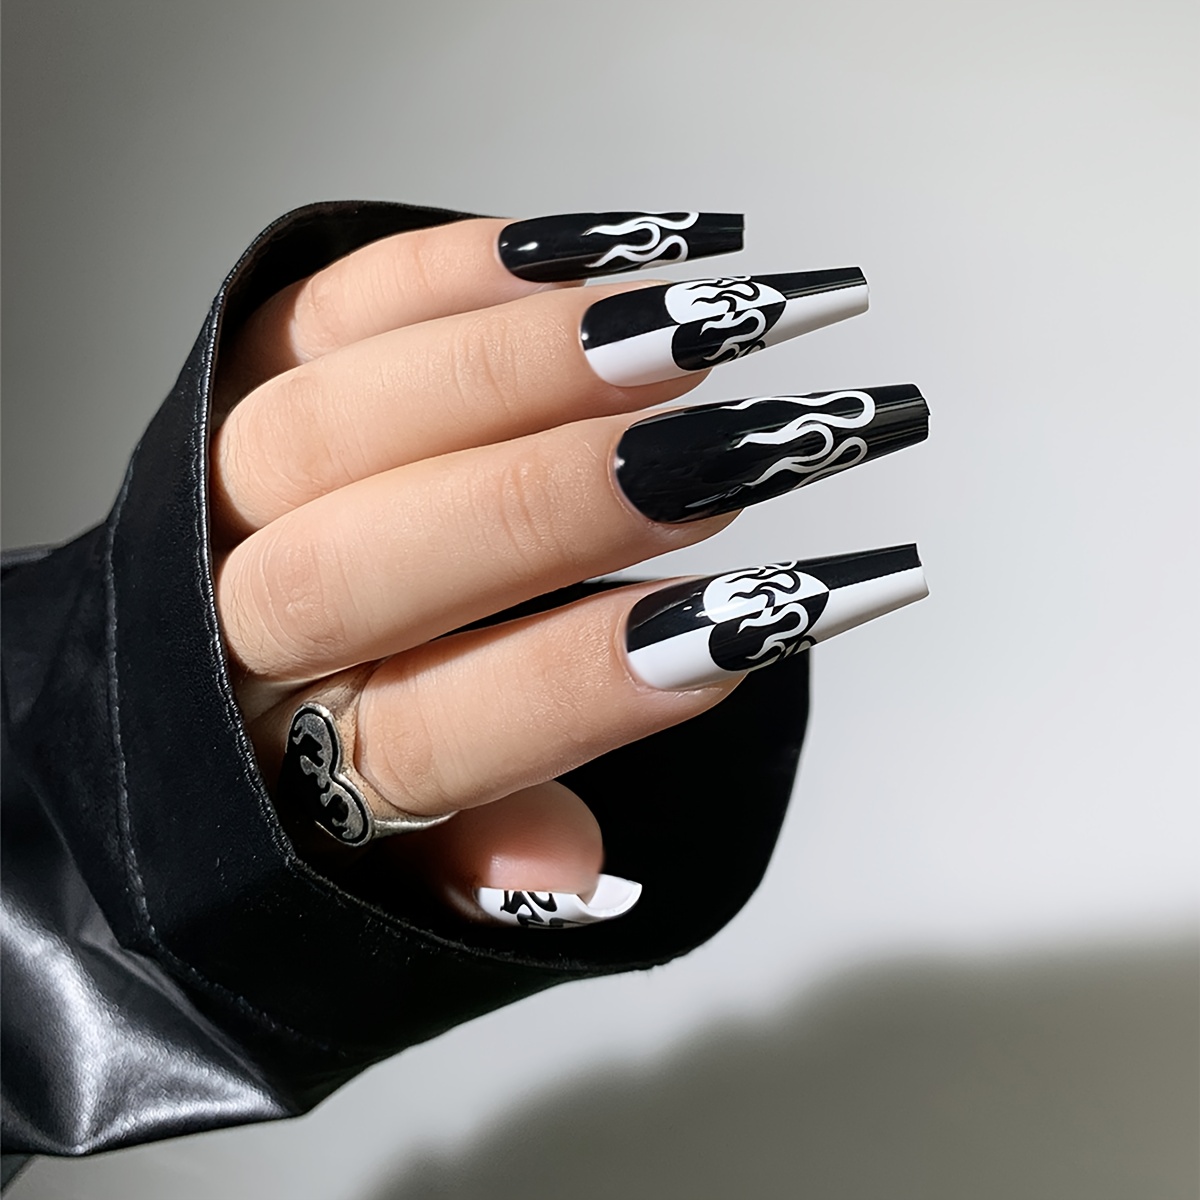 

224pcs French Tip Press On Nails Long With Designs Goth Black And White Flame False Fake Nails Press On Coffin Artificial Nails For Women Stick On Nails With Glue On Static Nails